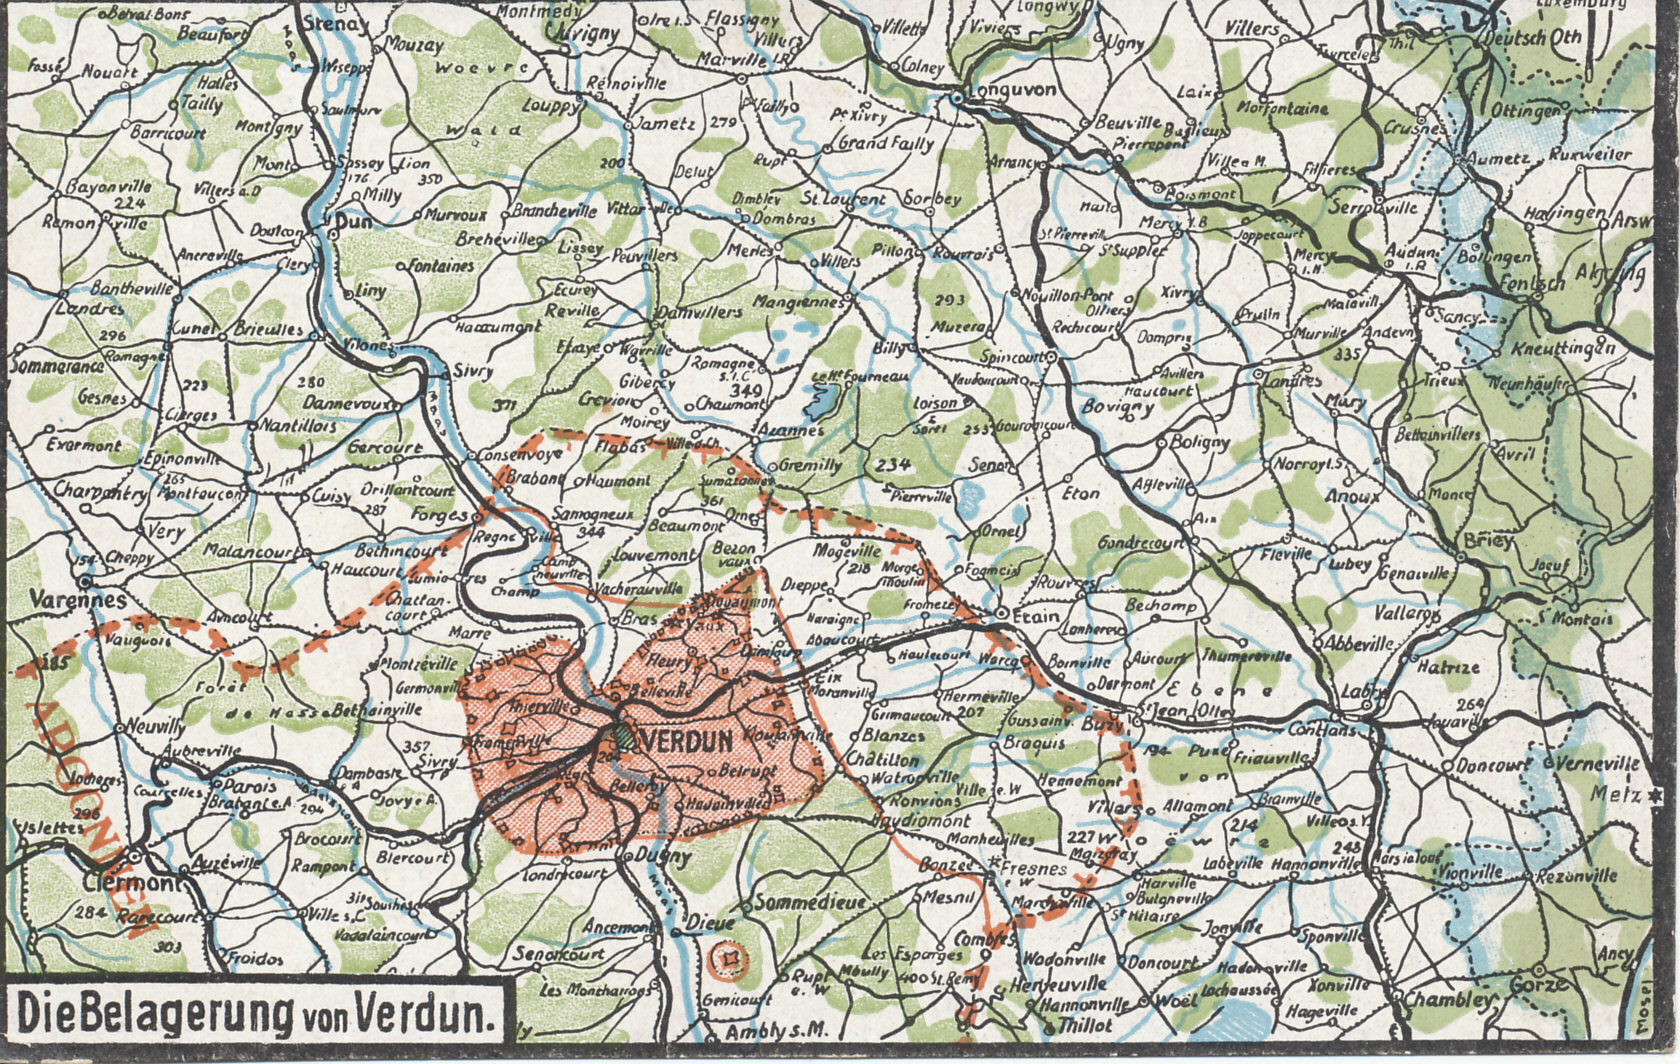 Postcard map with of Verdun, France, showing the forts of Douaumont and Vaux and the German siege line.
Text:
Die Belagerung von Verdun (The Seige of Verdun).
Reverse:
Postkarte / Feldpostkarte, dated France, May (?) 26, 1916.